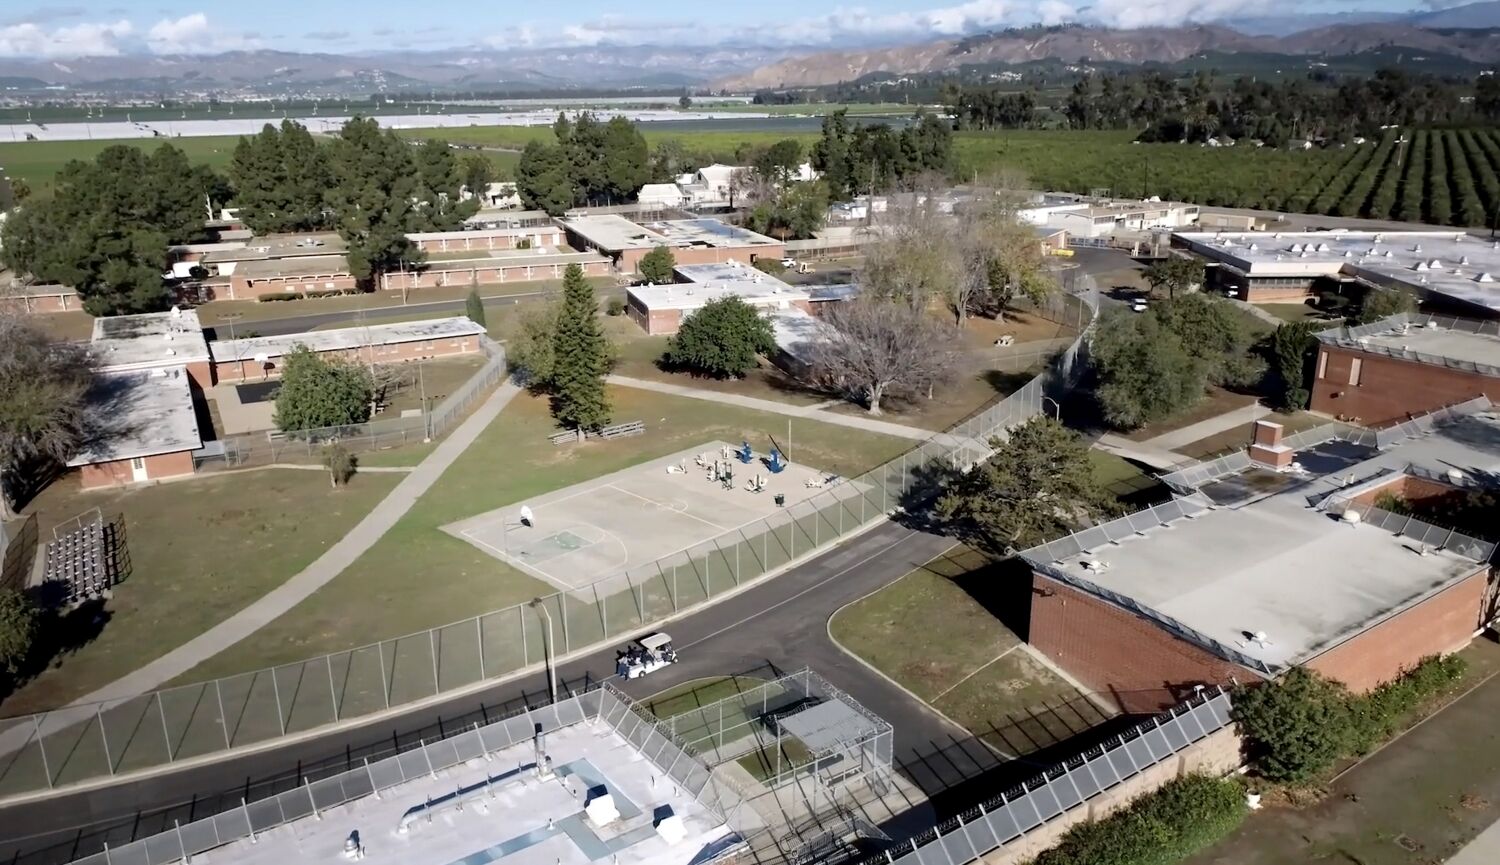 California is closing its last youth prisons. Will what replaces them be worse?